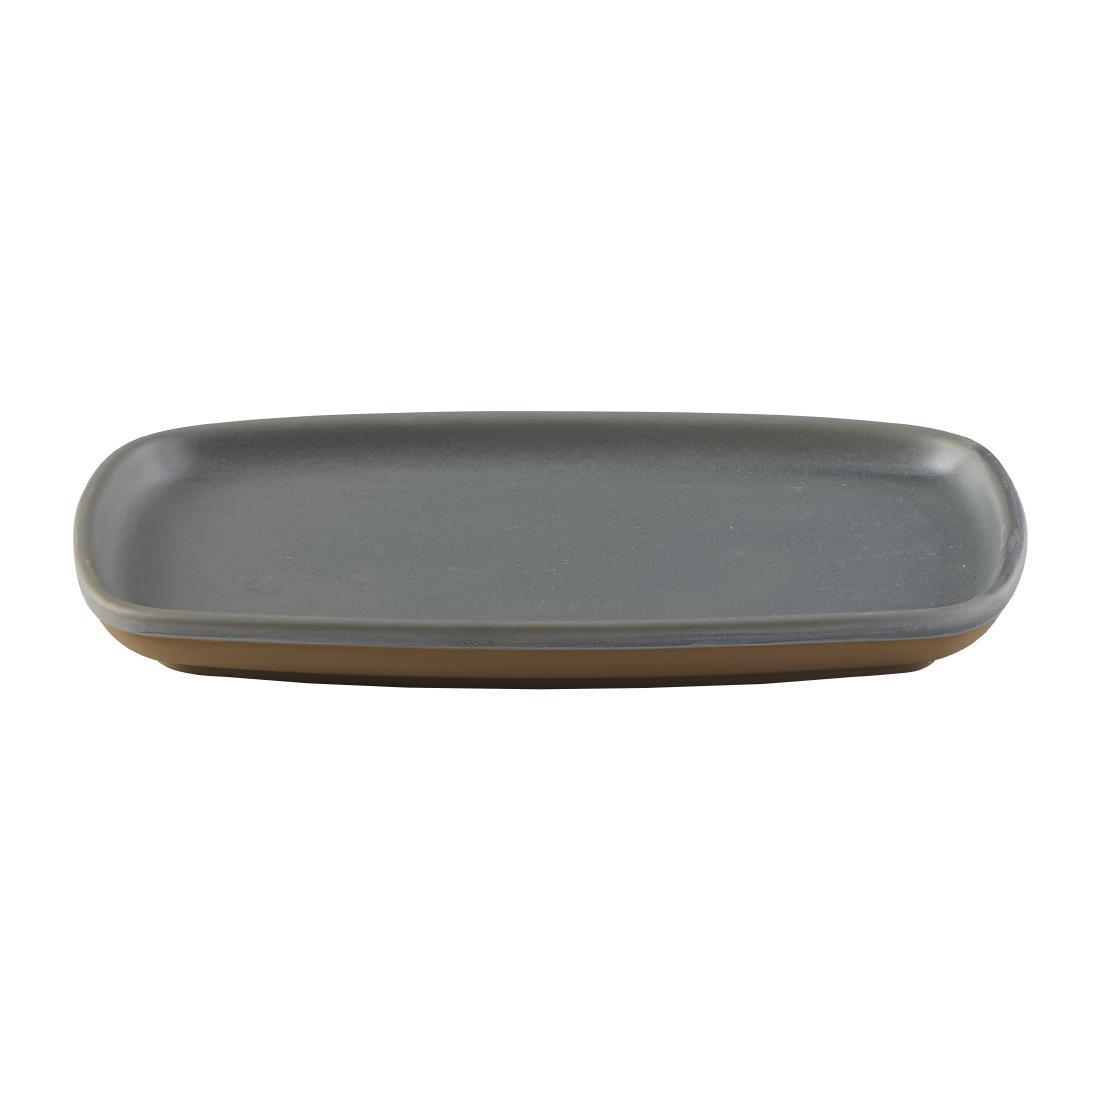 Churchill Emerge Seattle Oblong Plate Grey 222x152mm (Pack of 6) - FS957  - 2